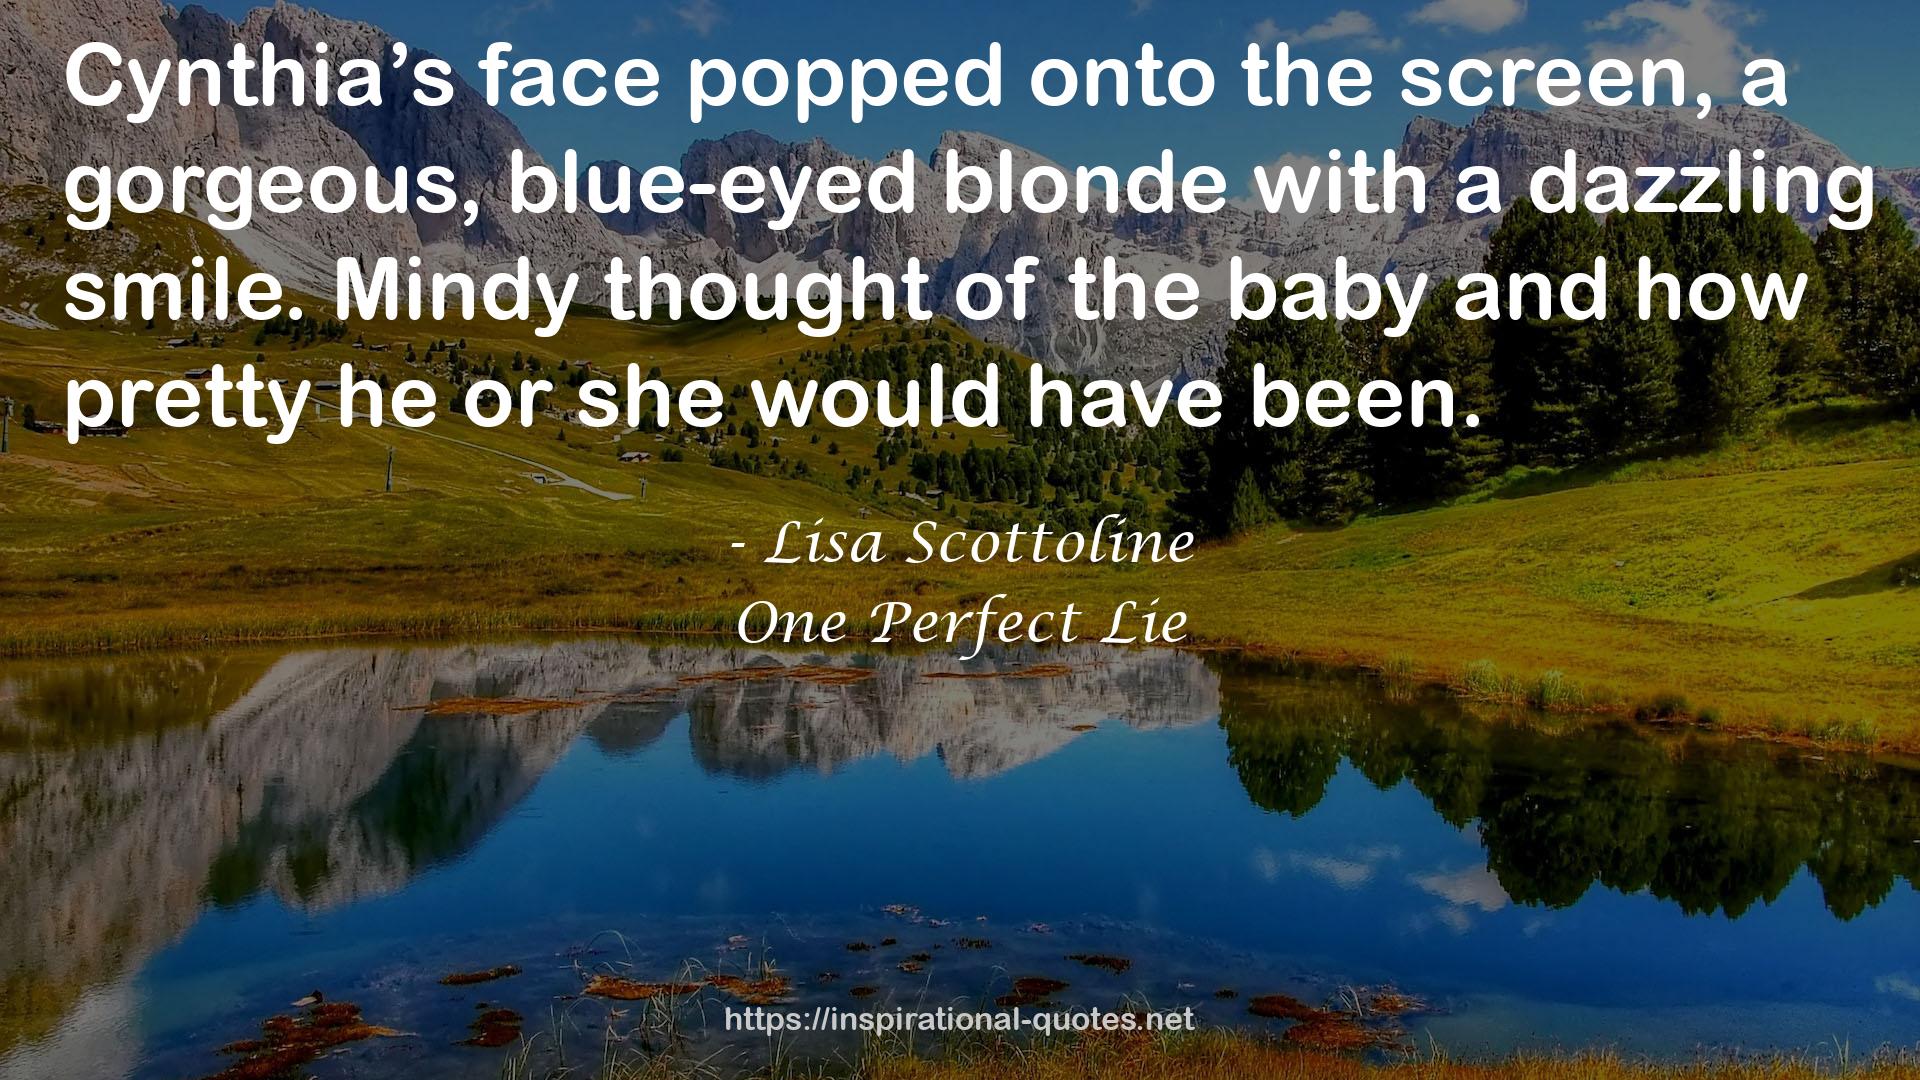 One Perfect Lie QUOTES